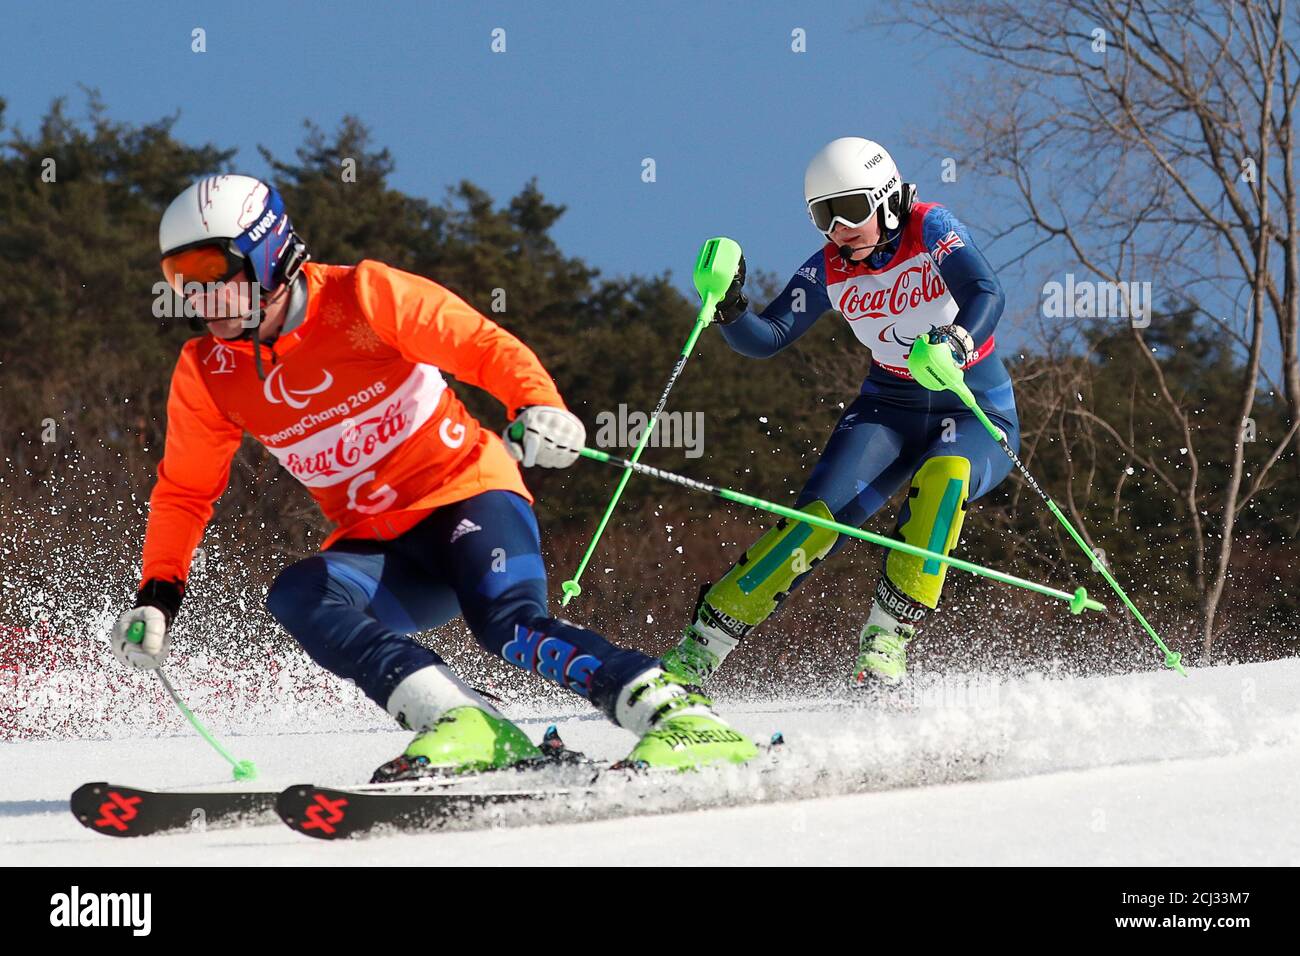 Alpine Skiing - Pyeongchang 2018 Winter Paralympics - Women's Super Combined Slalom - Visually Impaired - Jeongseon Alpine Centre - Jeongseon, South Korea - March 13, 2018 - Kelly Gallagher of Britain and her guide  REUTERS/Paul Hanna Stock Photo